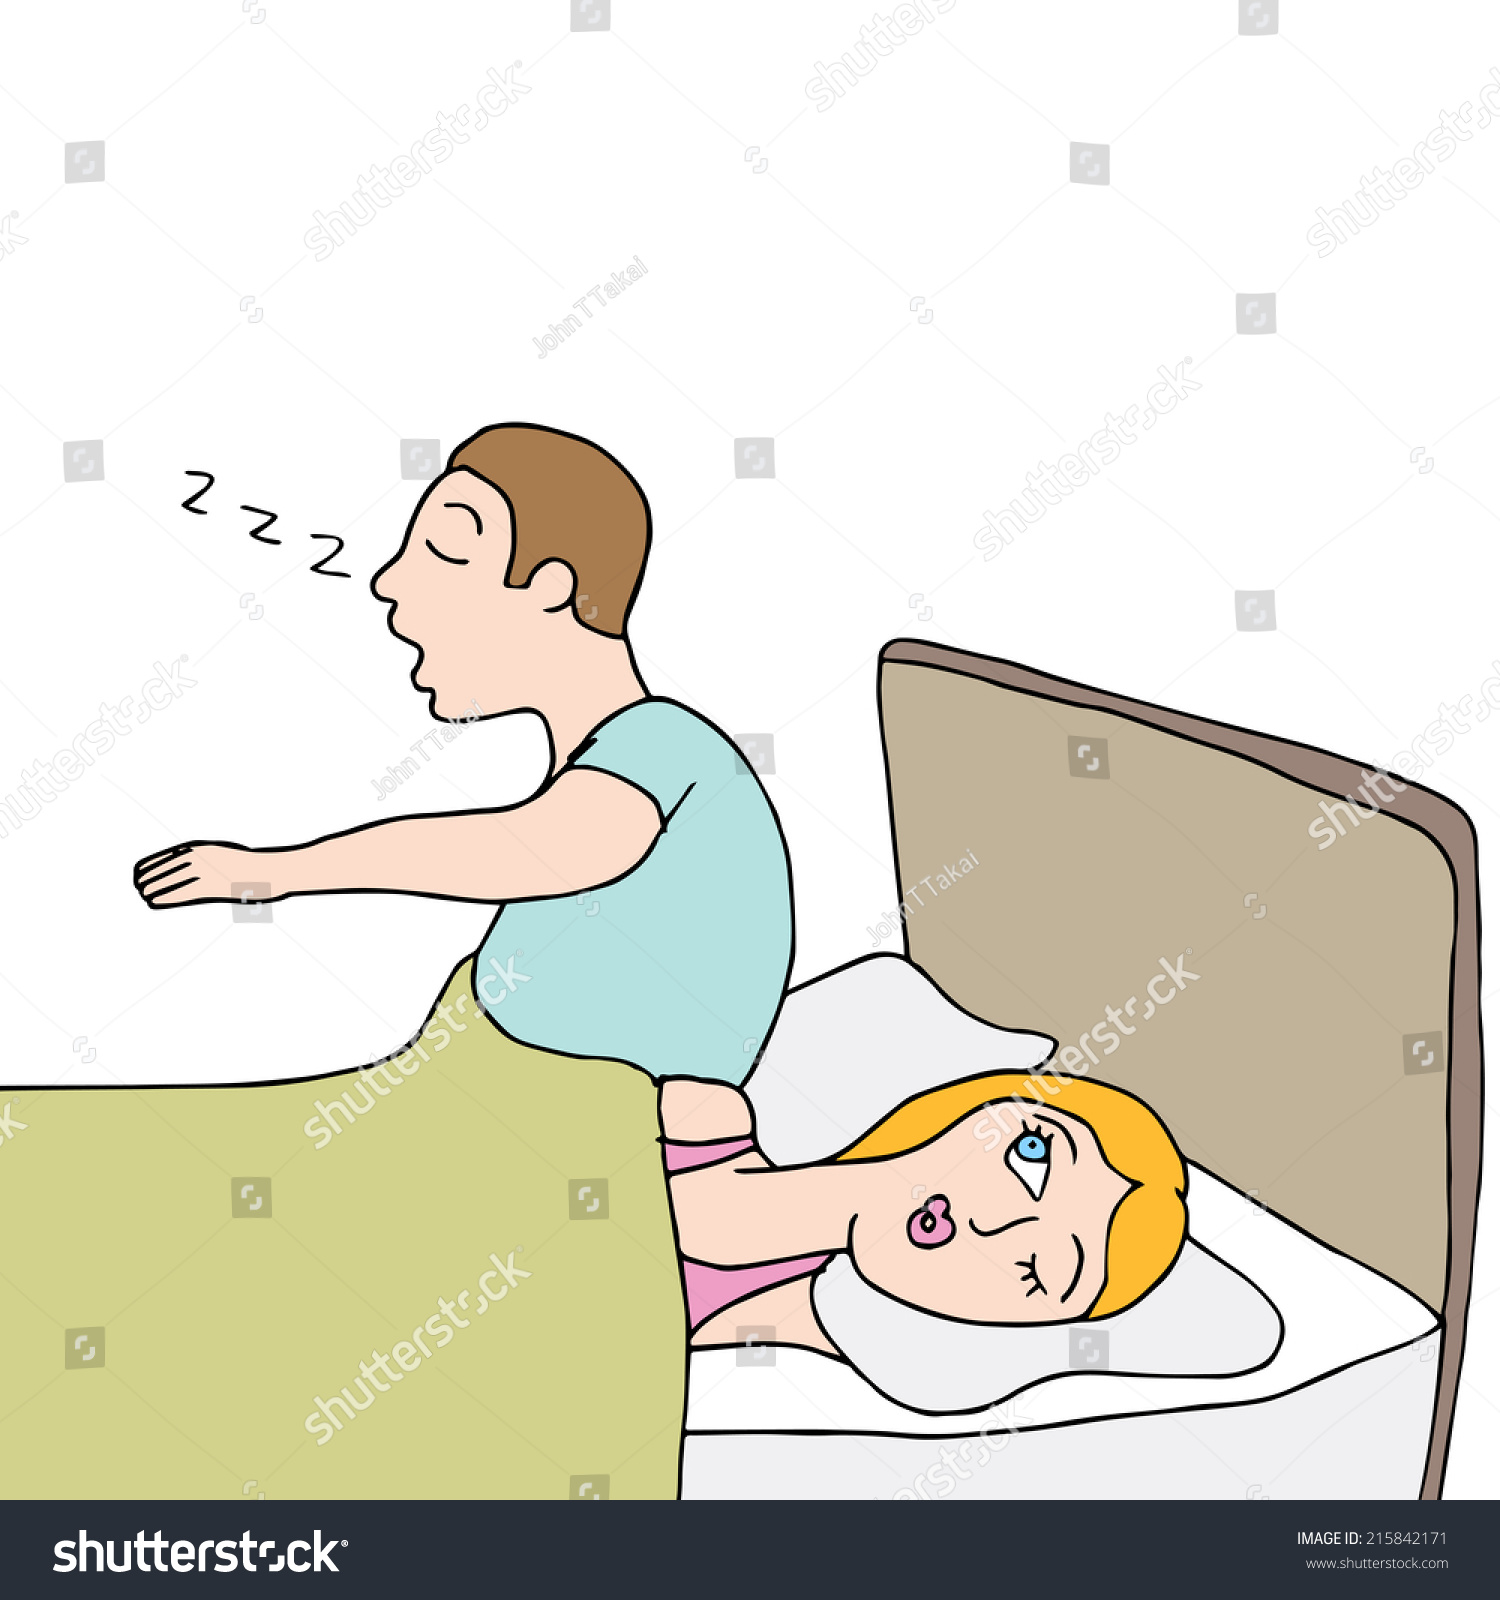 An Image Of A Sleep Walking Man In Bed With His Wife. Stock Vector ...